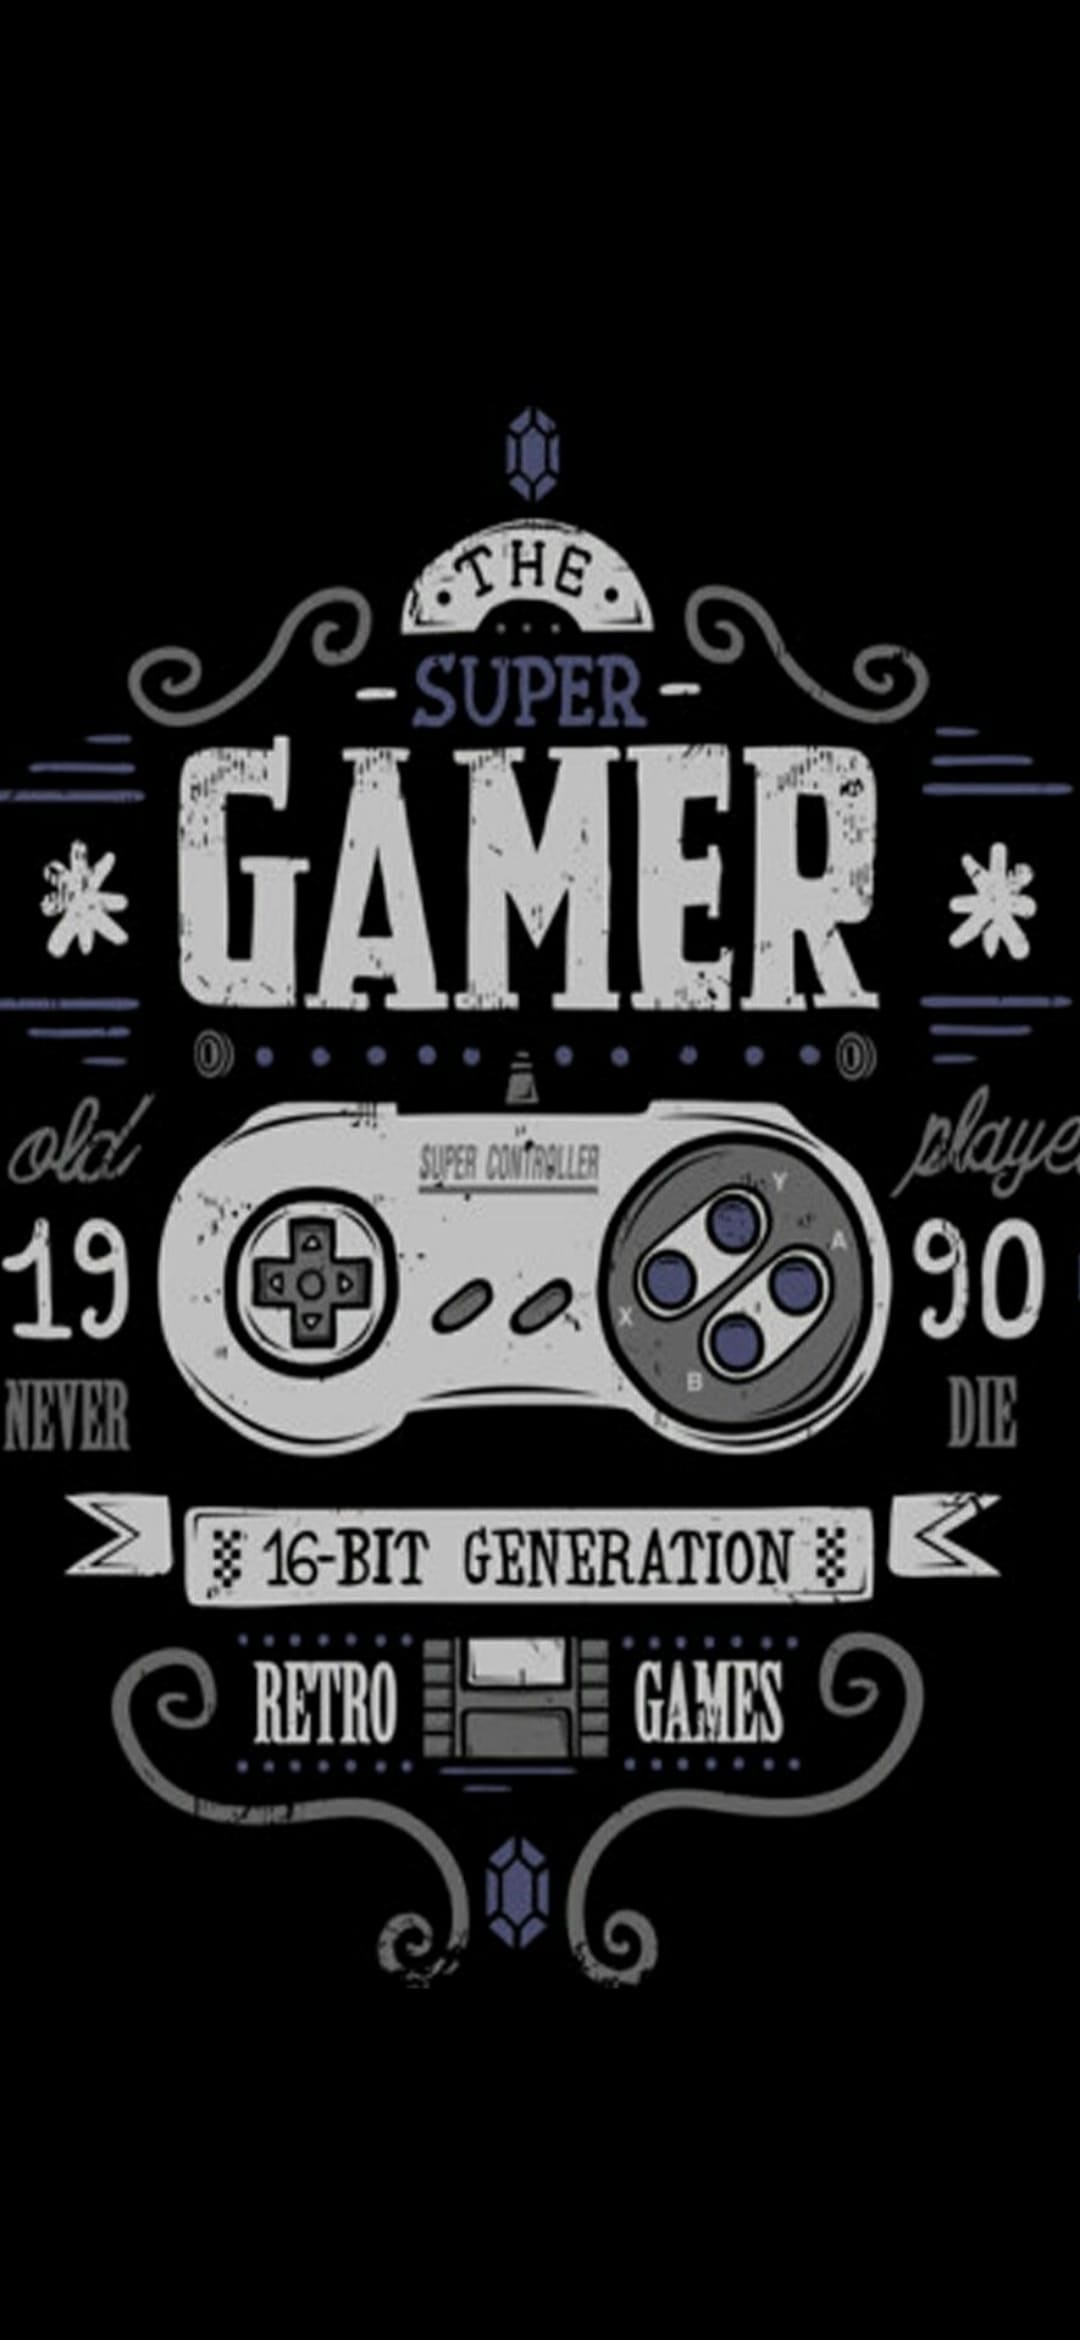 Gamers Wallpapers: Top 65 Best Gamers Backgrounds Download